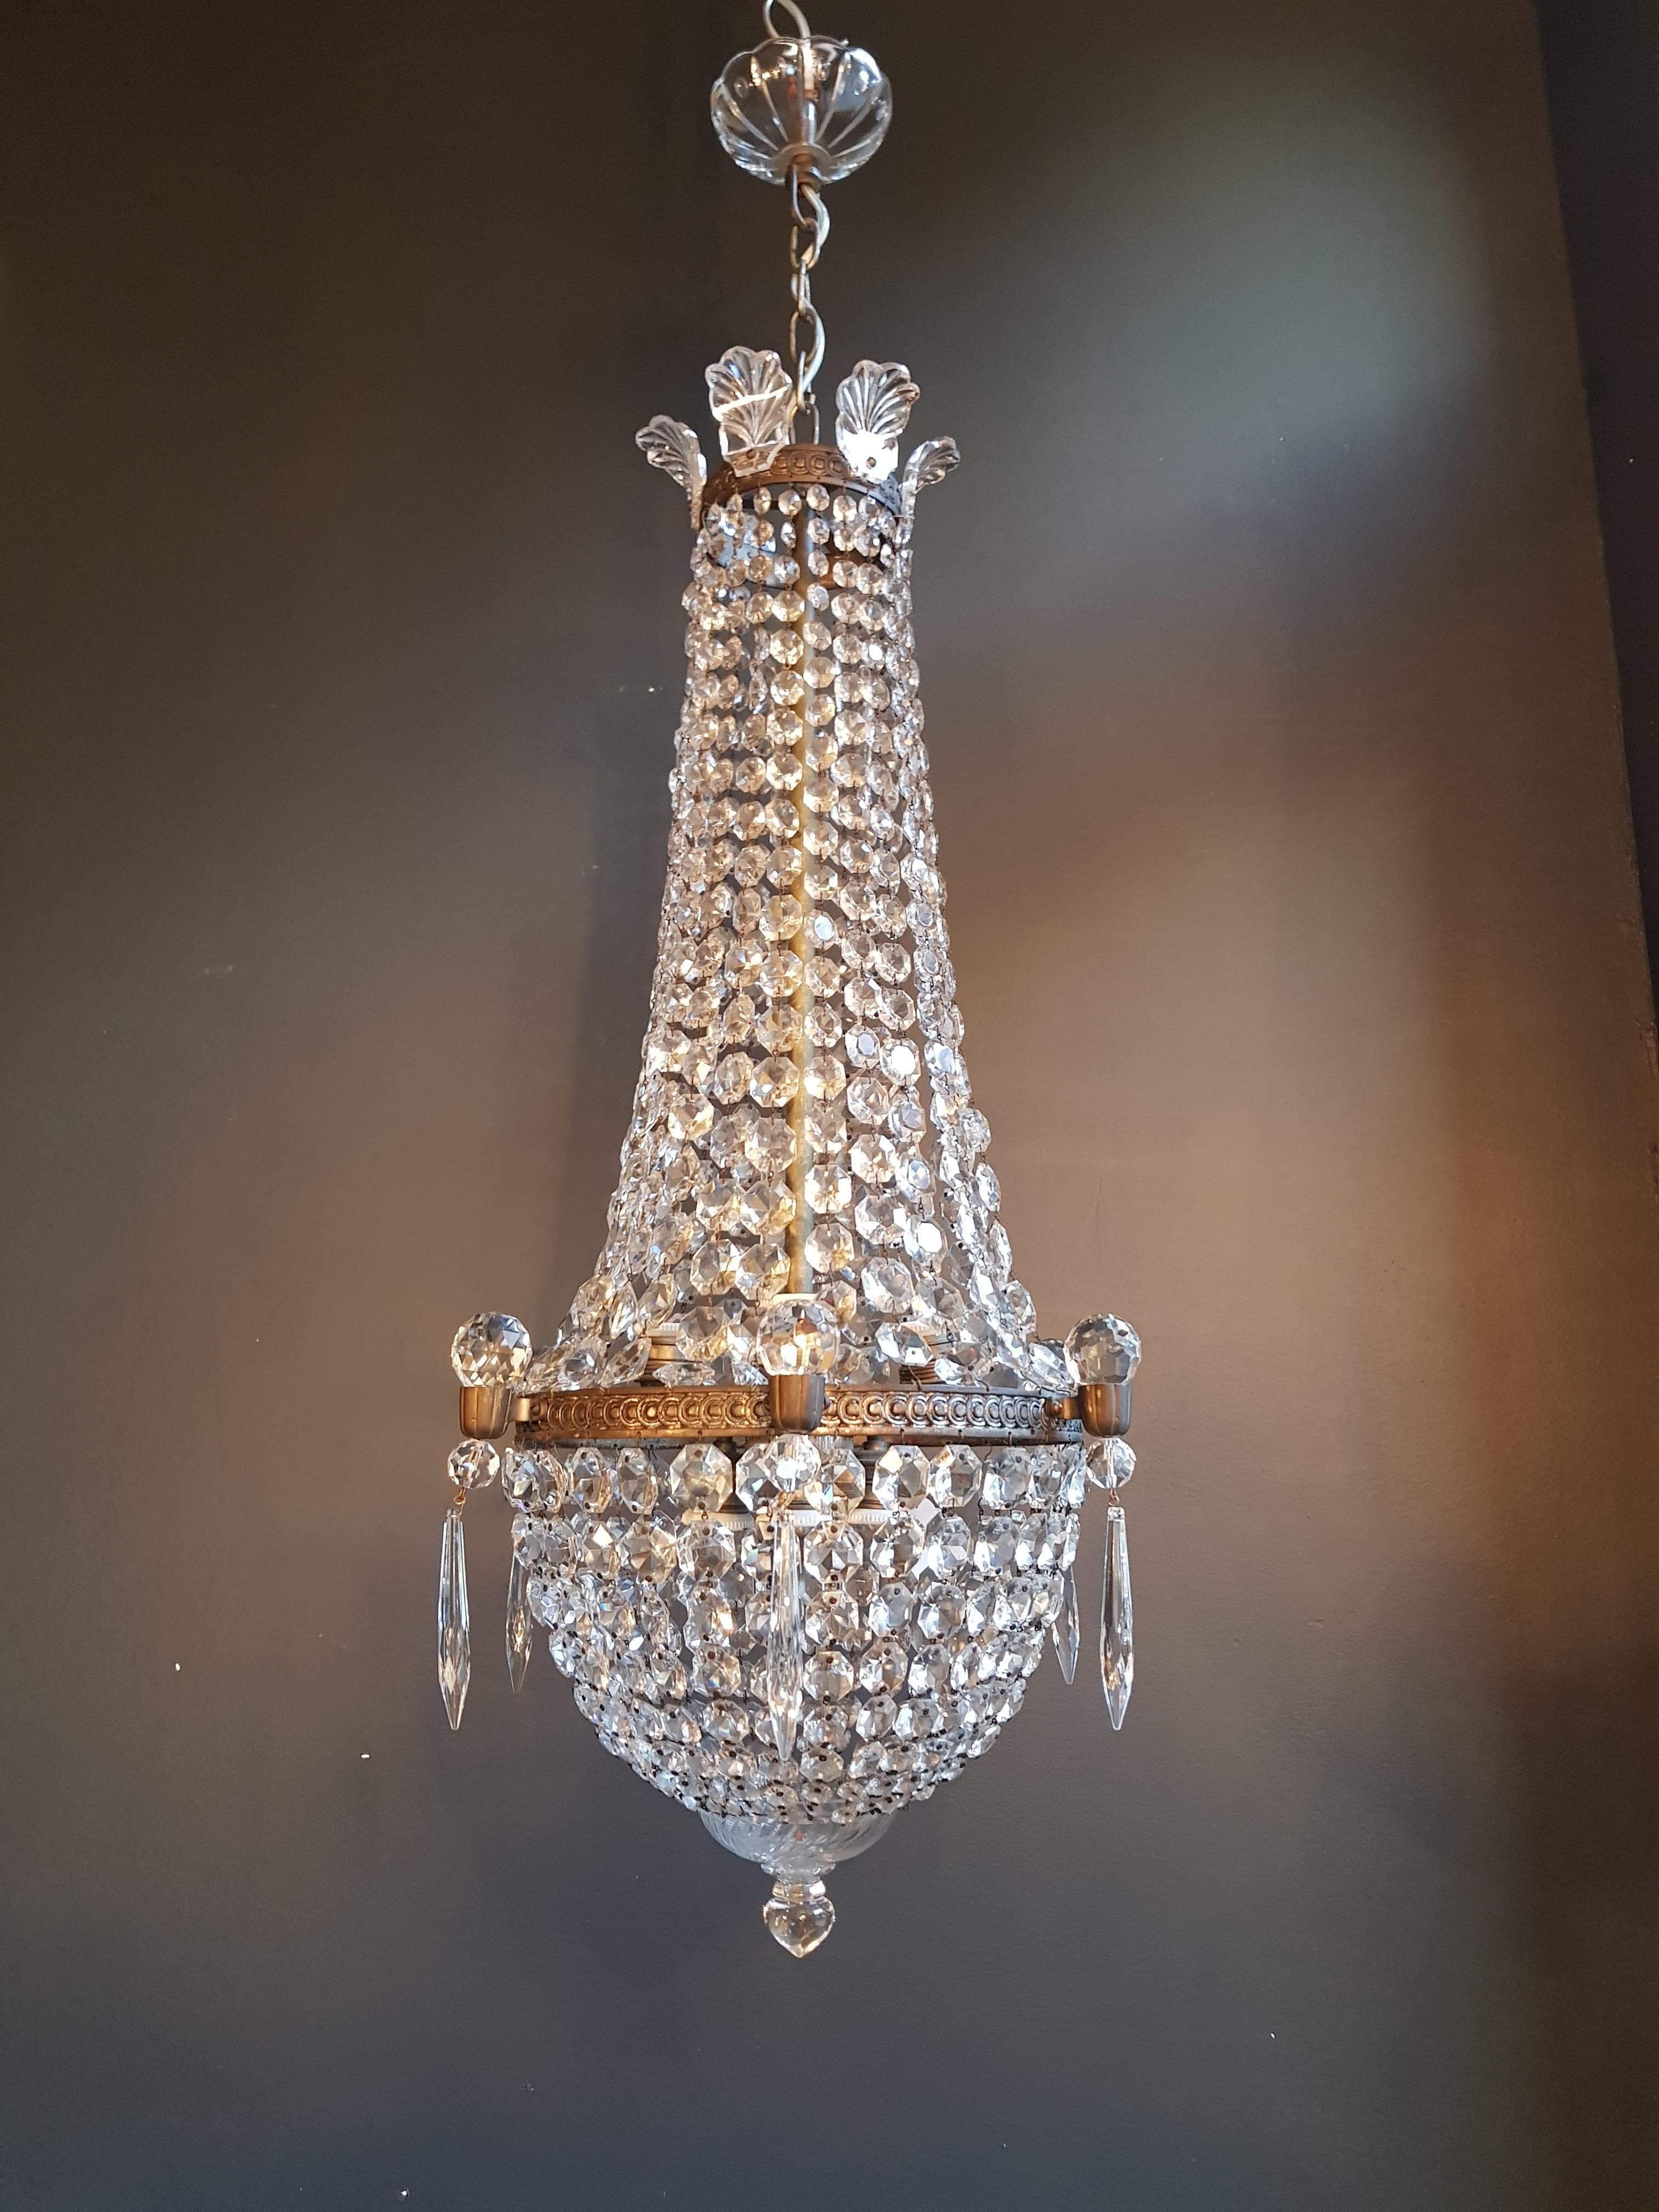 Original preserved chandelier, circa 1930. Cabling and sockets completely renewed. Crystal hand knotted.
Measures: Total height: 115 cm, height without chain: 88 cm, diameter 38 cm, weight (approximately) 8 kg.

Number of lights: Five-light bulb